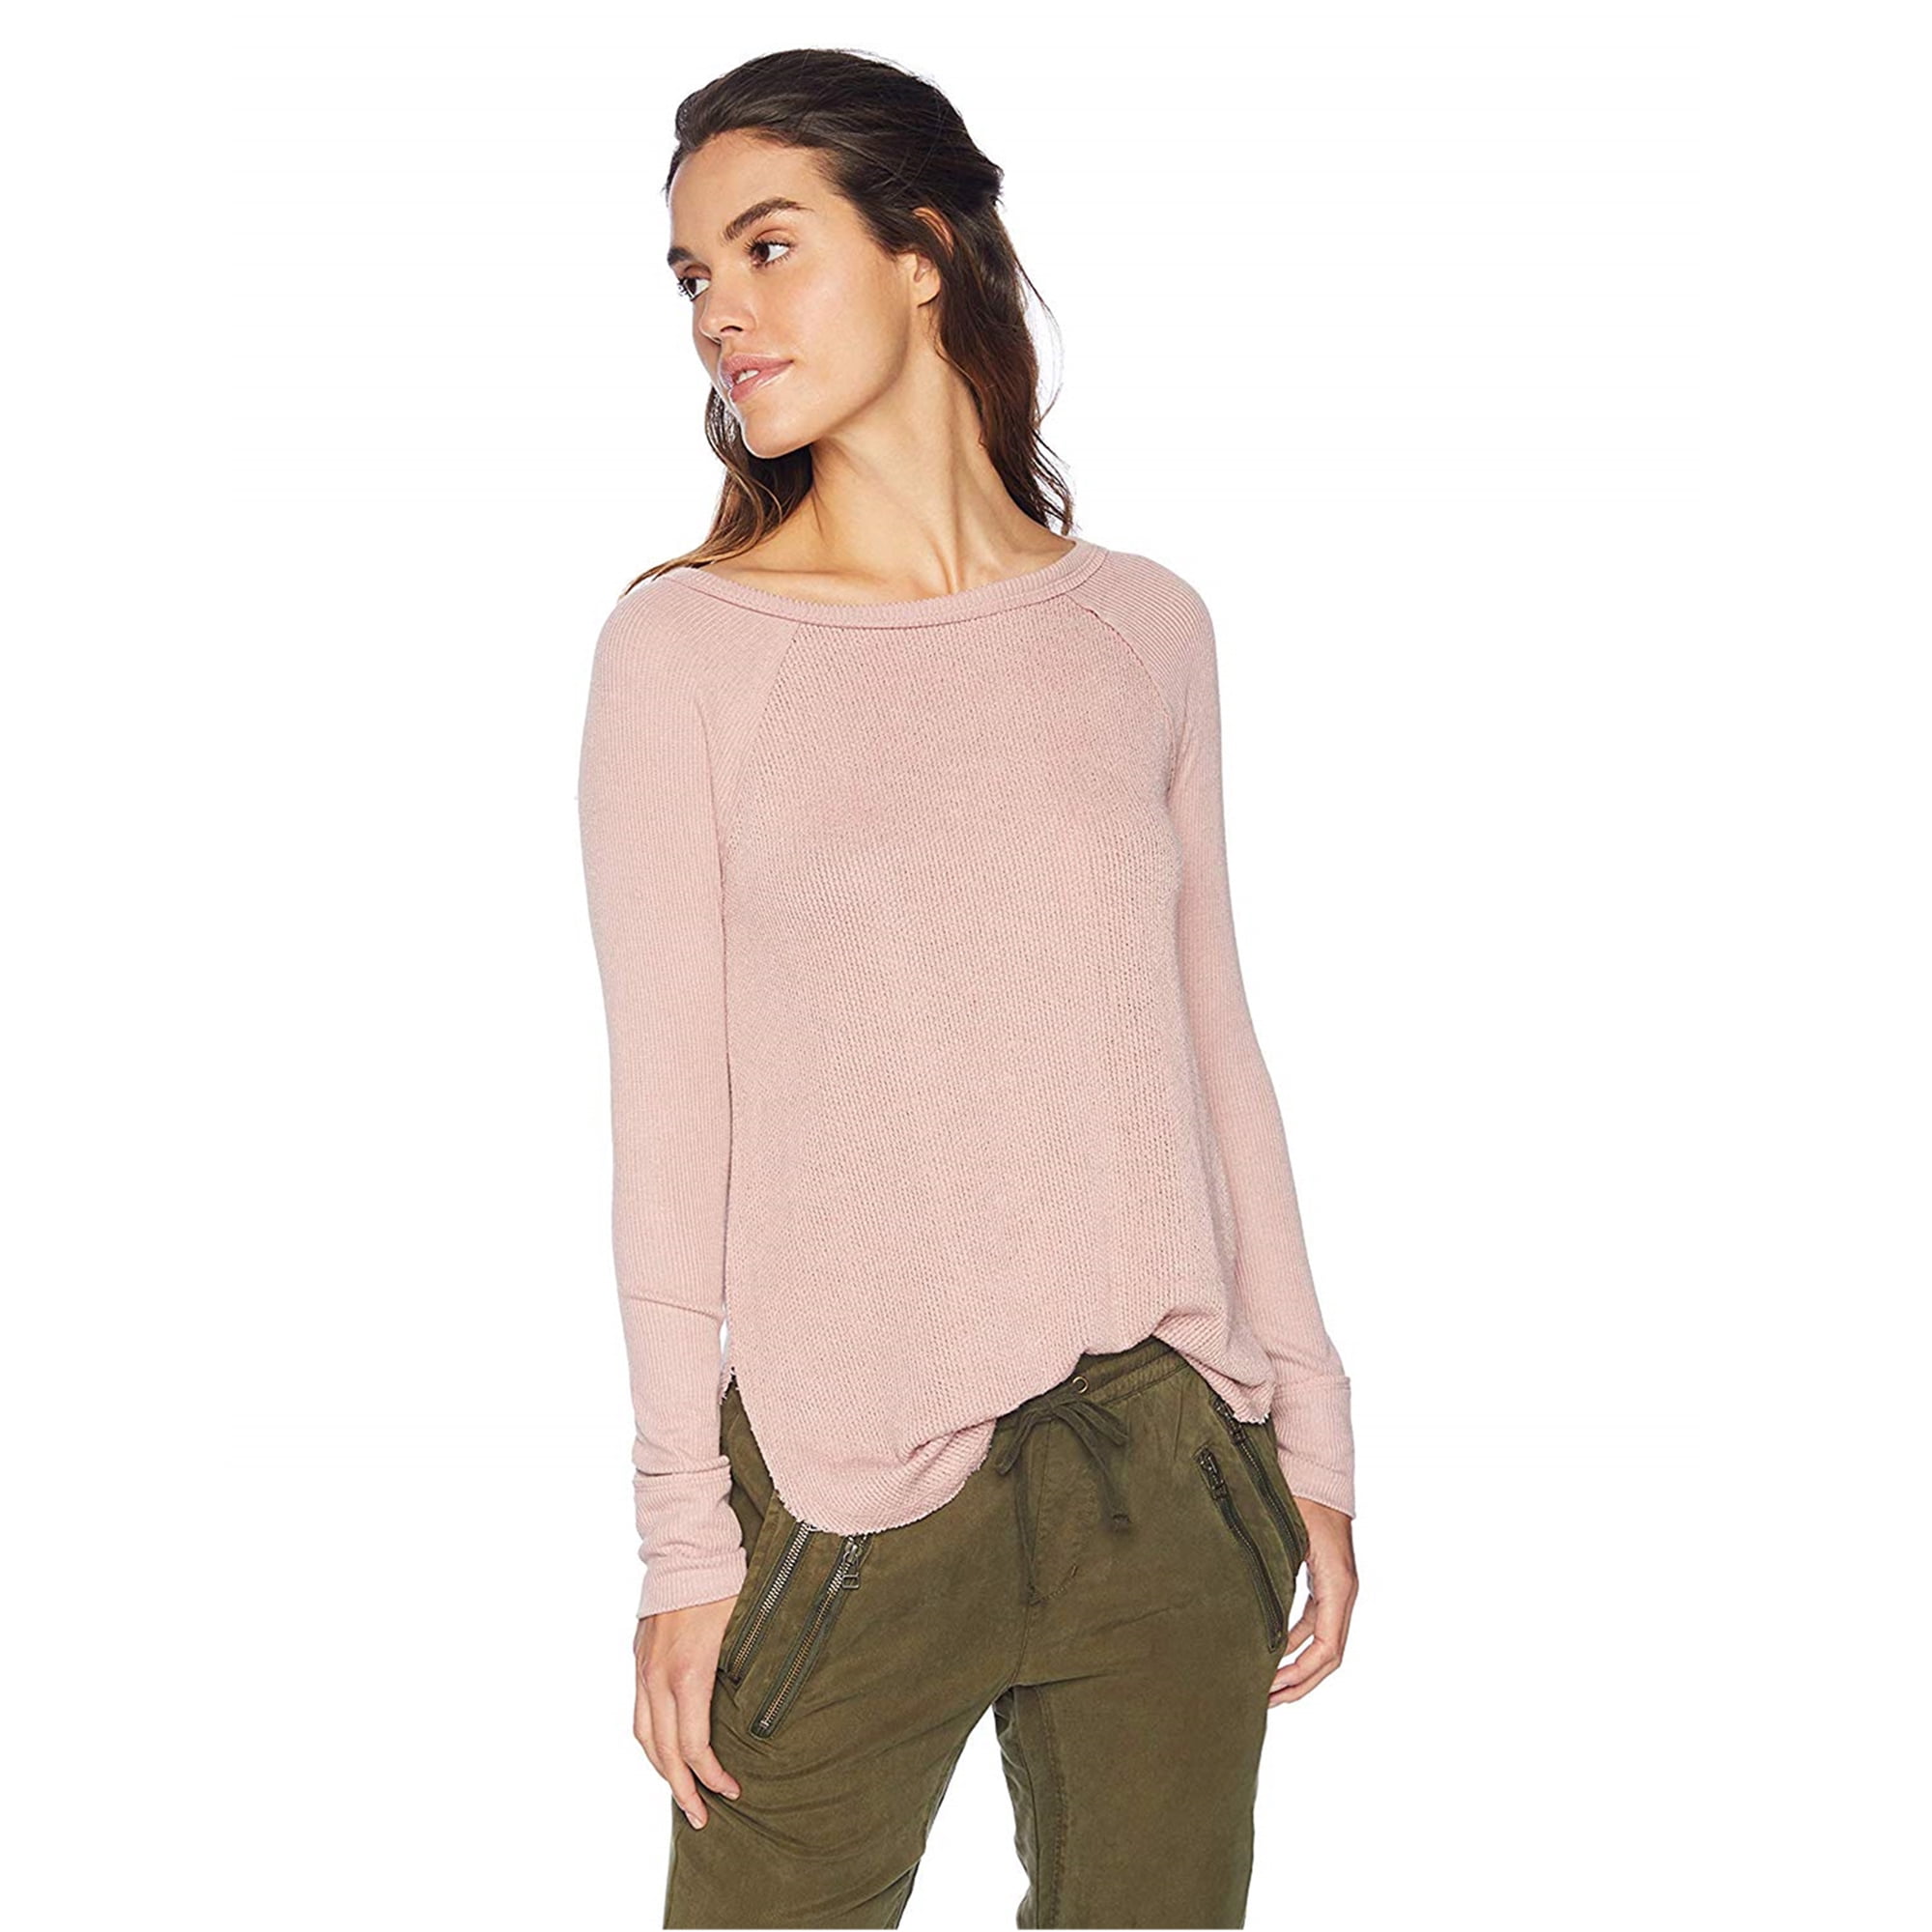 LUCKY BRAND $49 Womens New 1127 Pink Waffle-Knit Long Sleeve Top L B+B ...